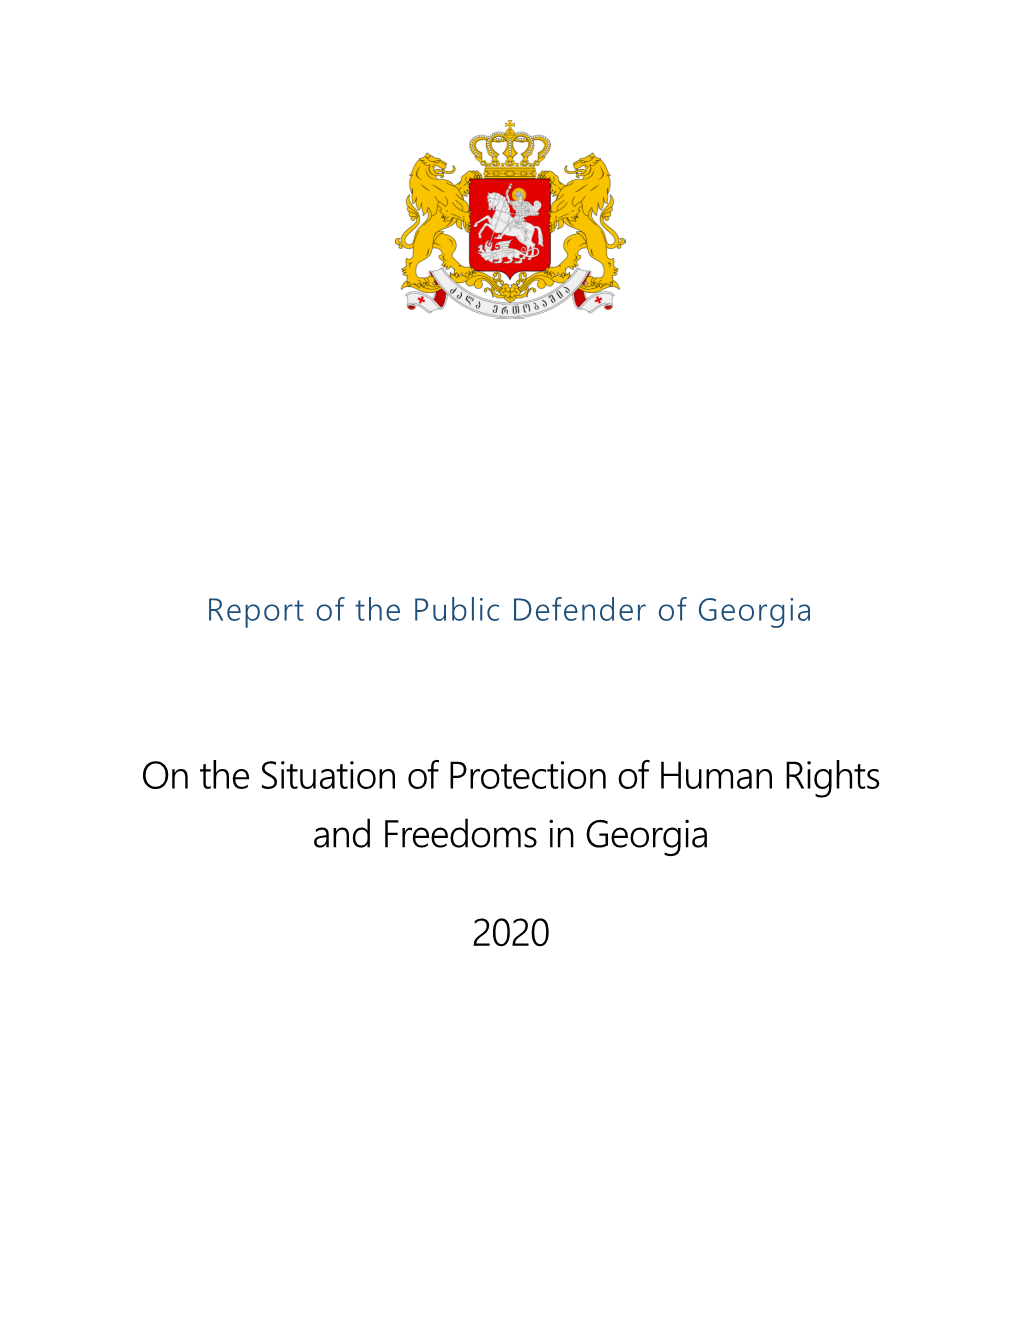 On the Situation of Protection of Human Rights and Freedoms in Georgia